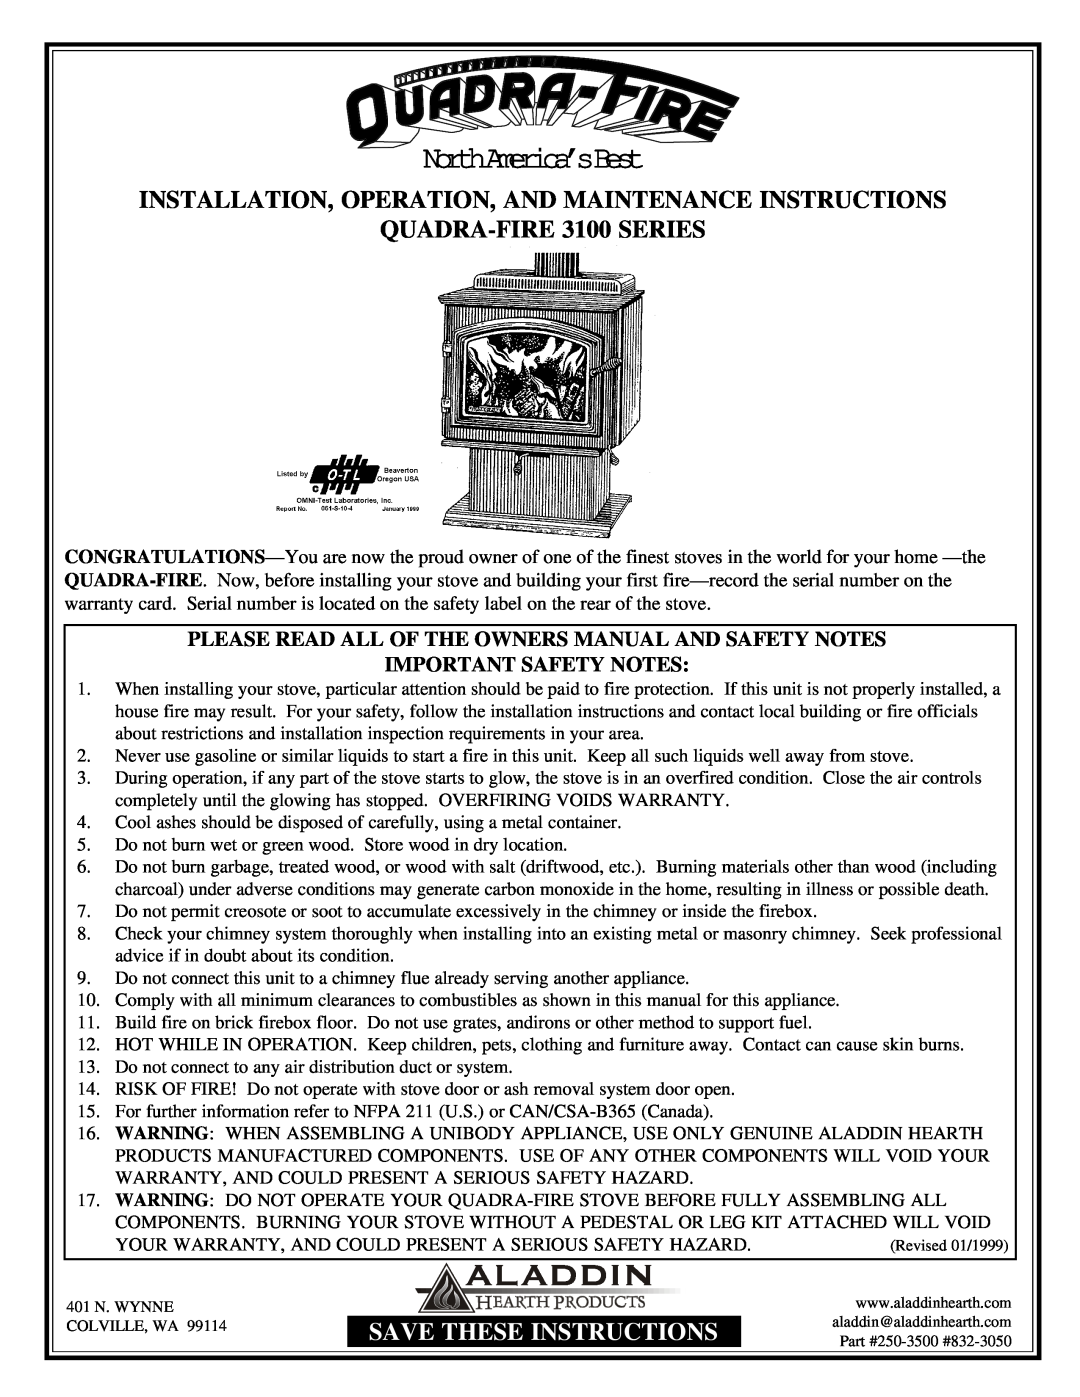 Quadra-Fire 3100 owner manual NorthAmerica’sBest, Installation, Operation, And Maintenance Instructions 